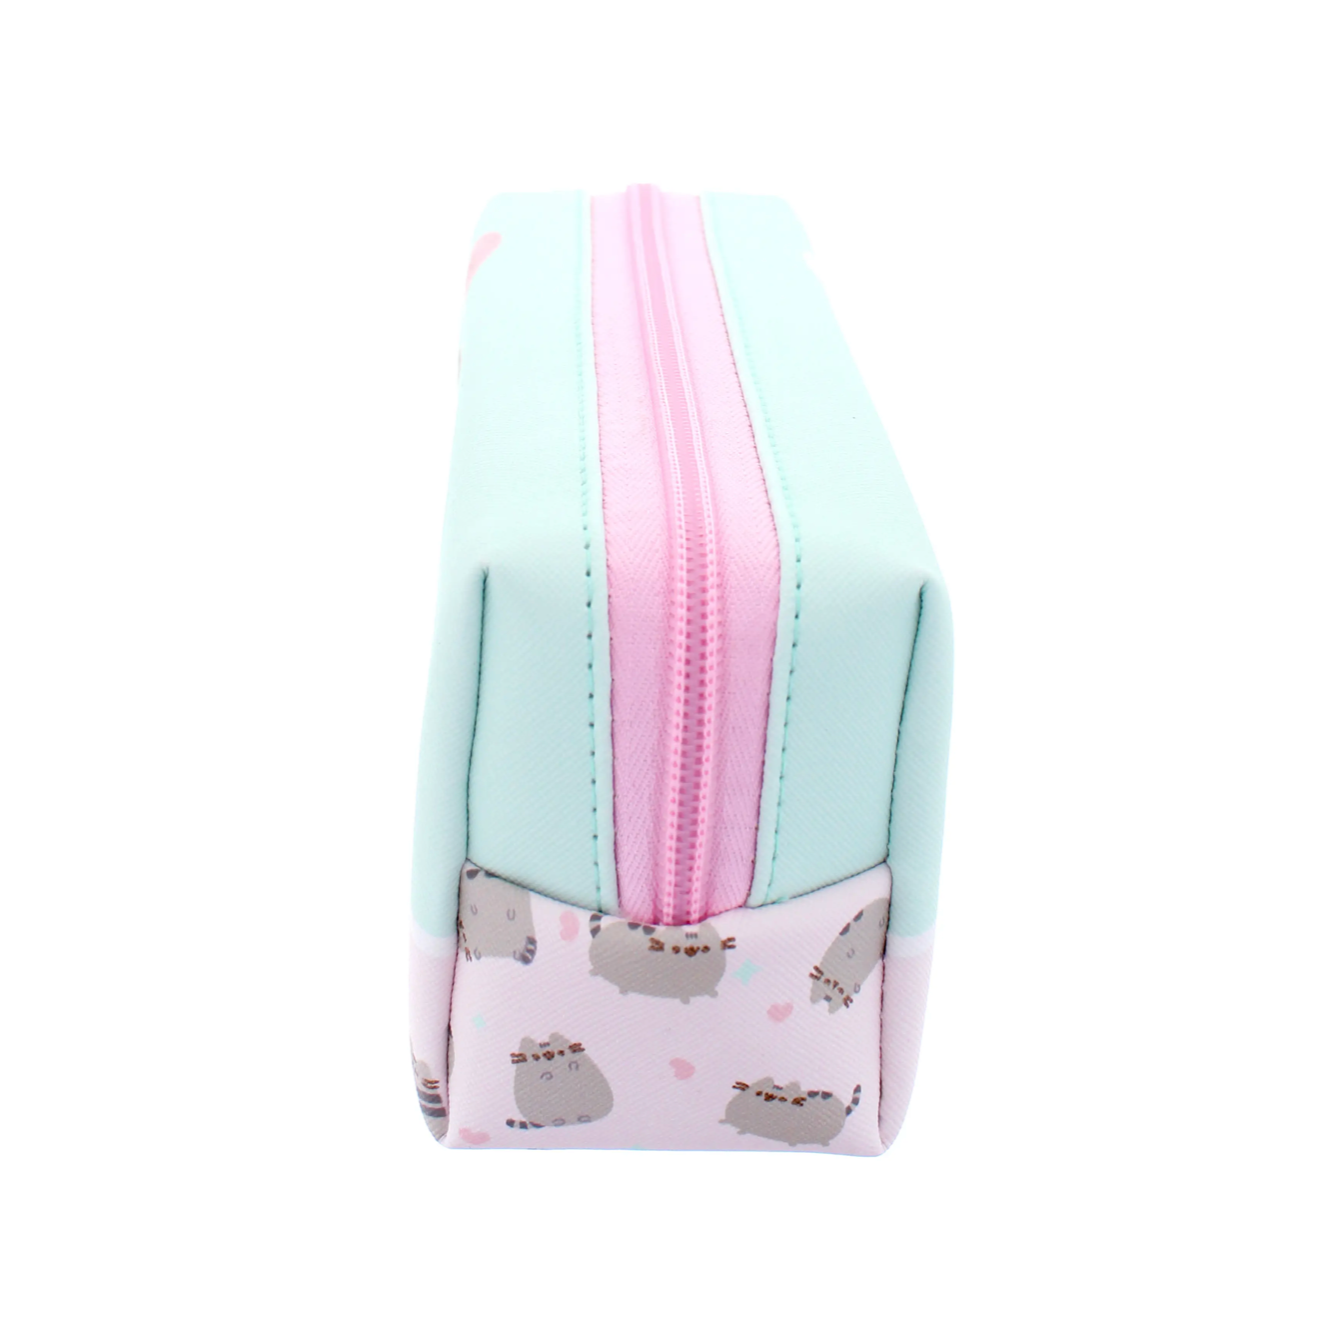 mint green and pink pencil case featuring Pusheen and pink zip